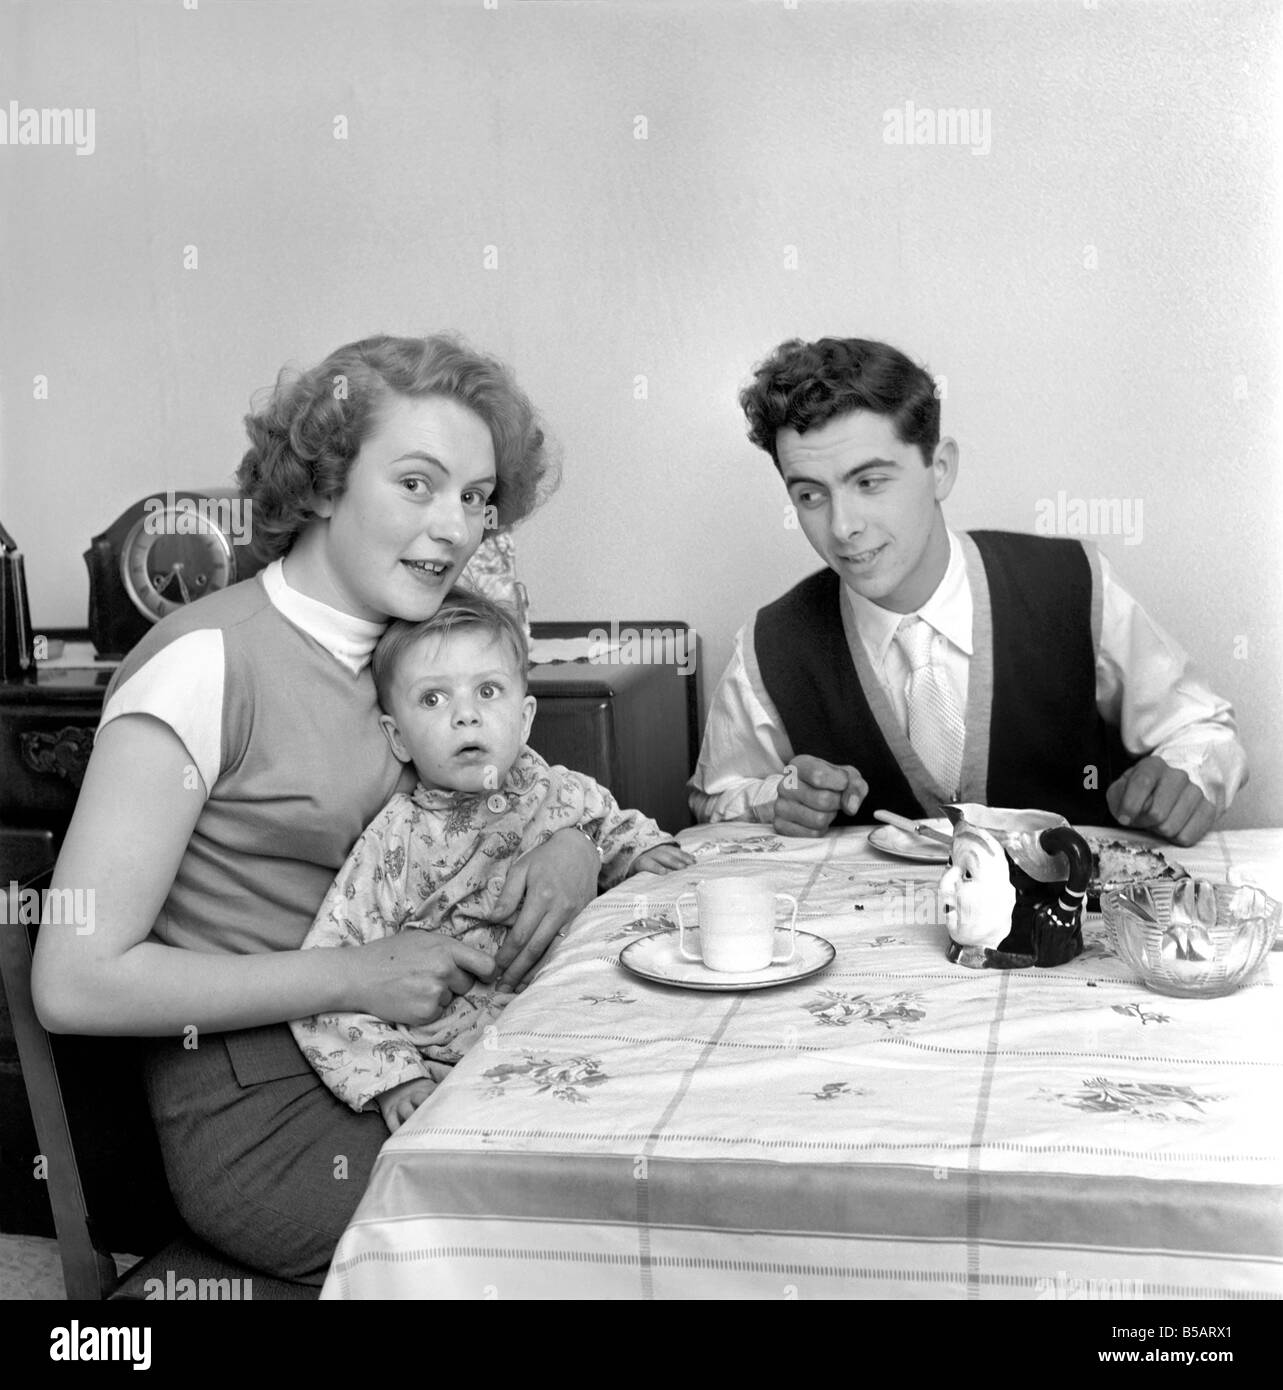 Family life: Mr. and Mrs. Hull with their son having tea. 1954 A160-006 Stock Photo